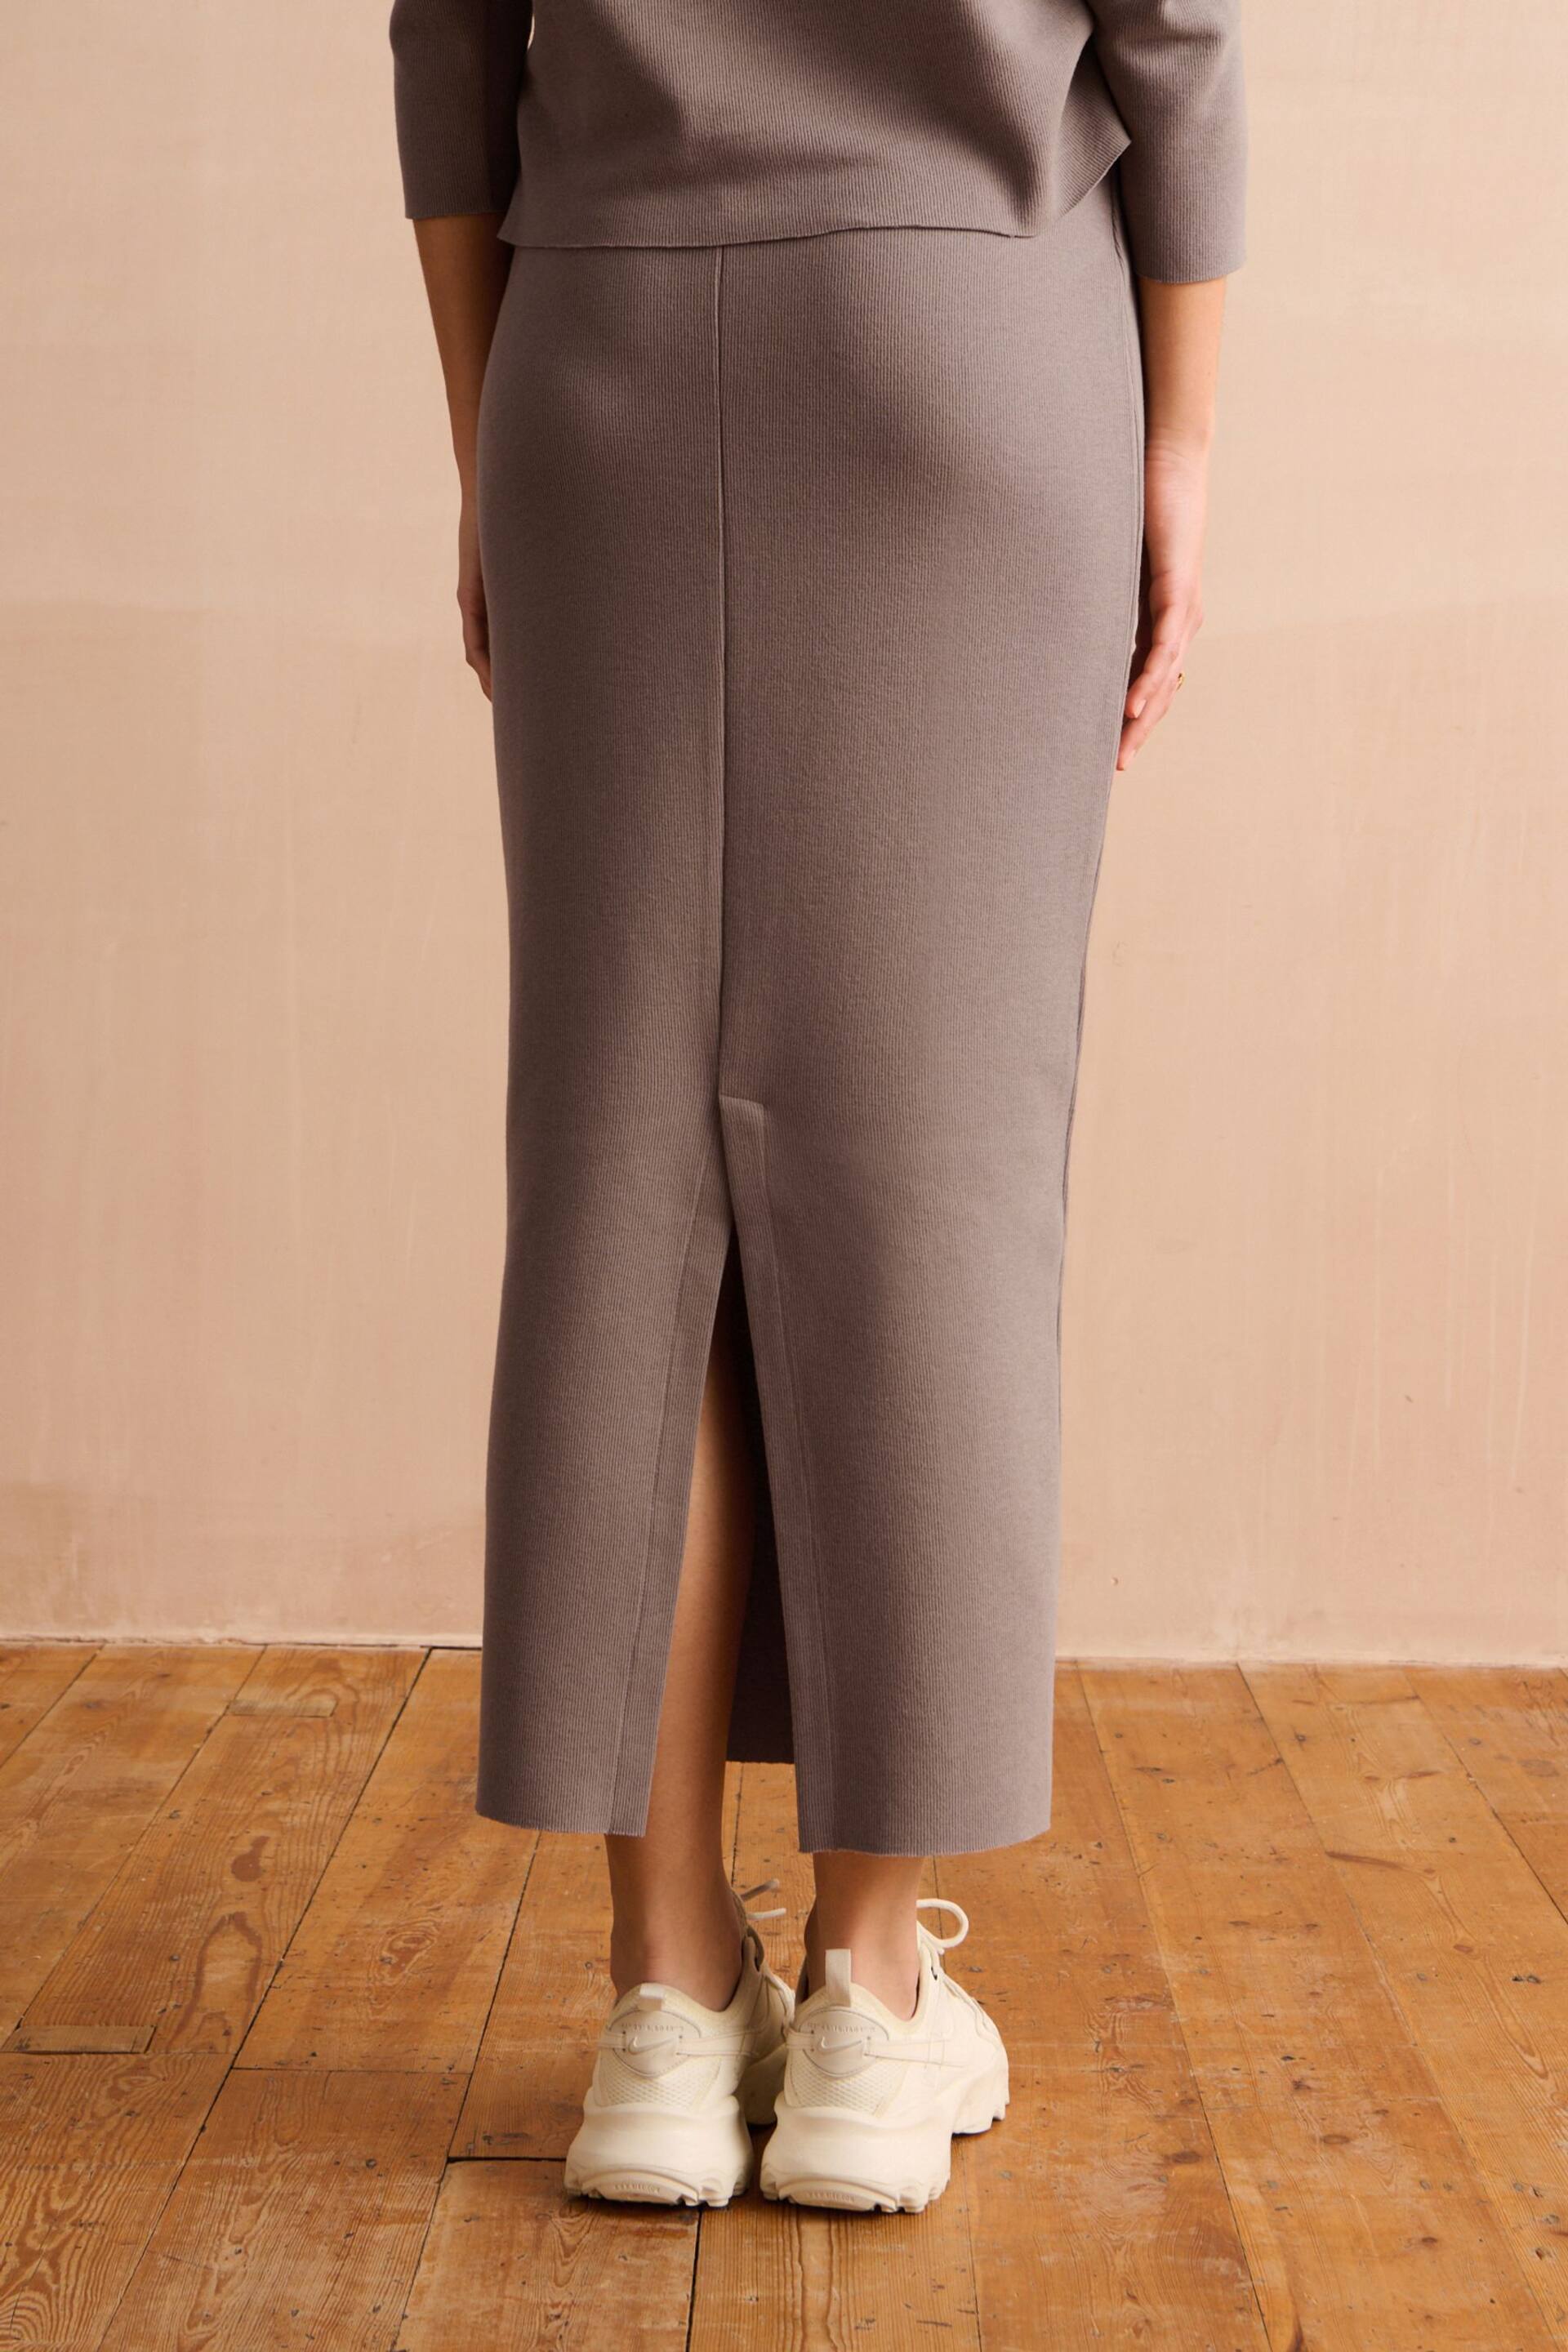 Neutral Taupe Textured Rib Slit Back Cosy Knit Midi Skirt - Image 4 of 7